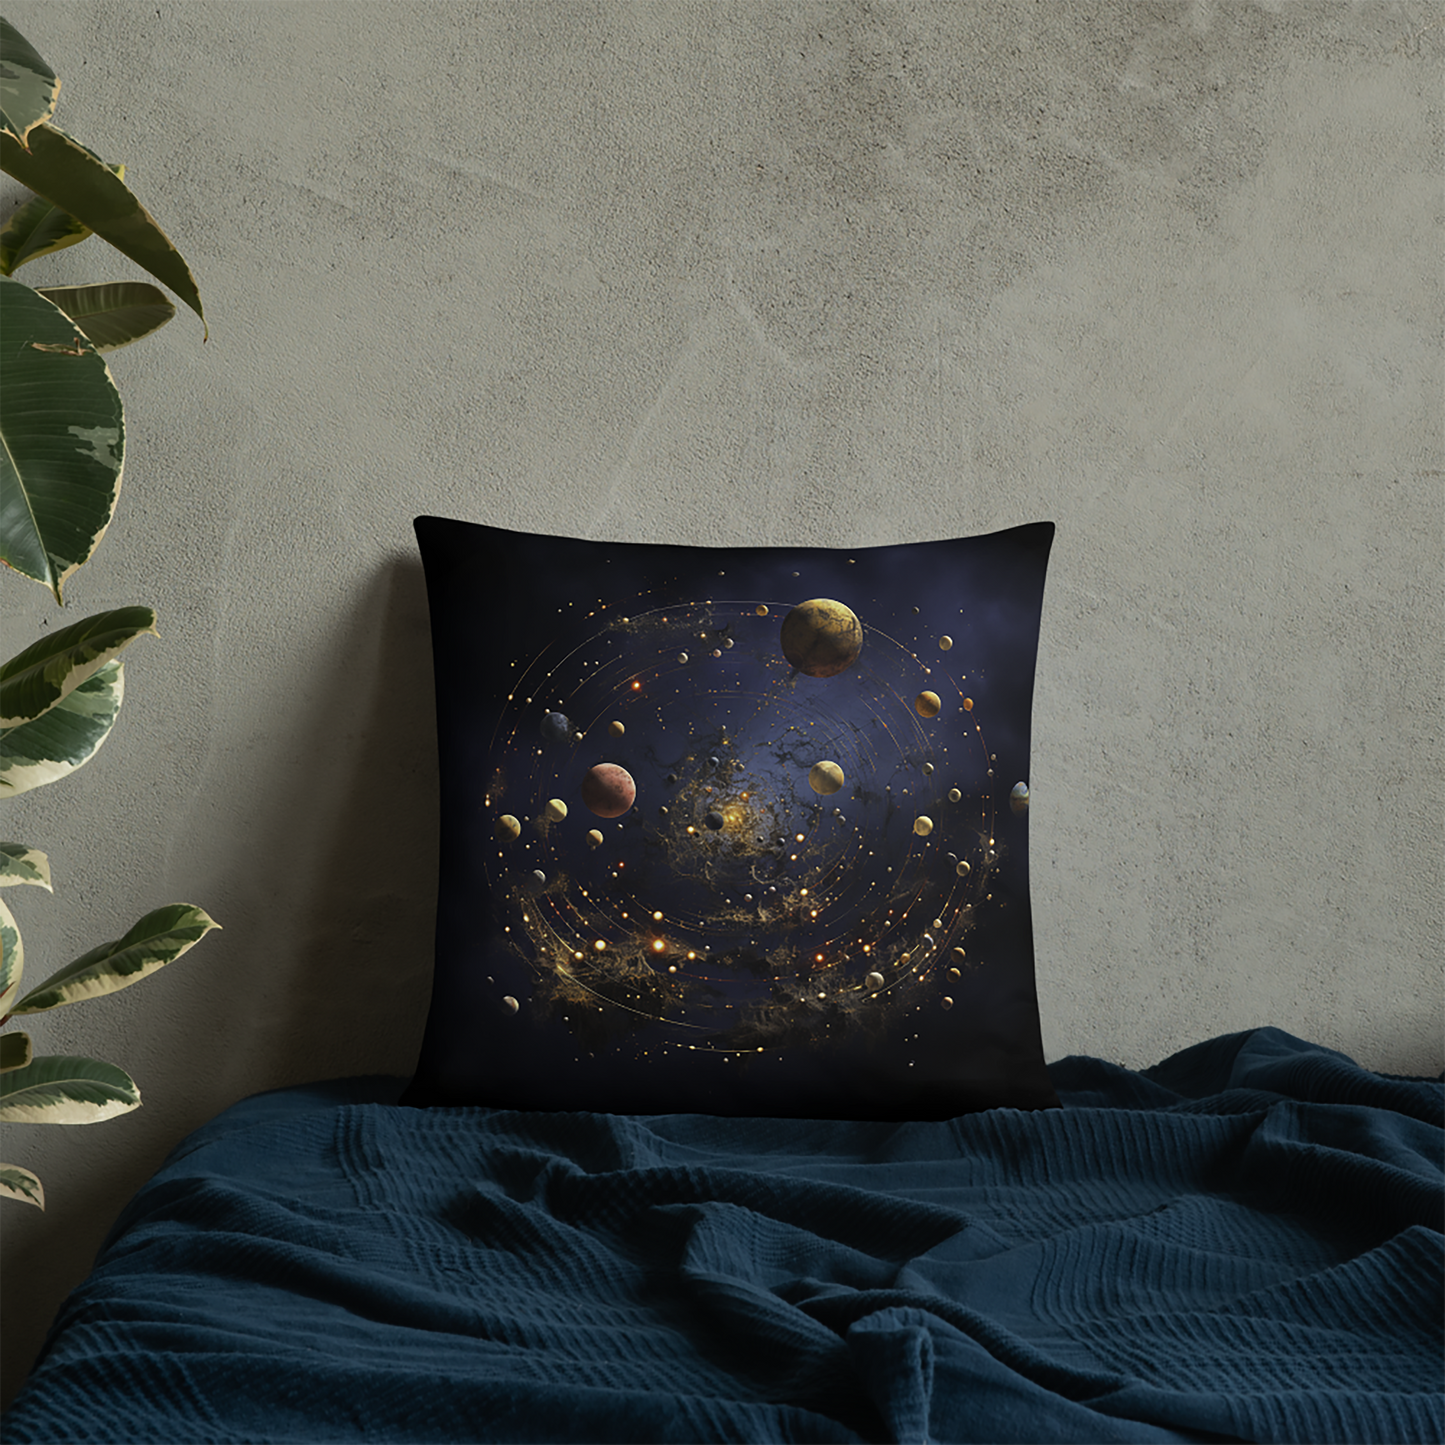 Space Throw Pillow Spiral Solar System Dream Polyester Decorative Cushion 18x18